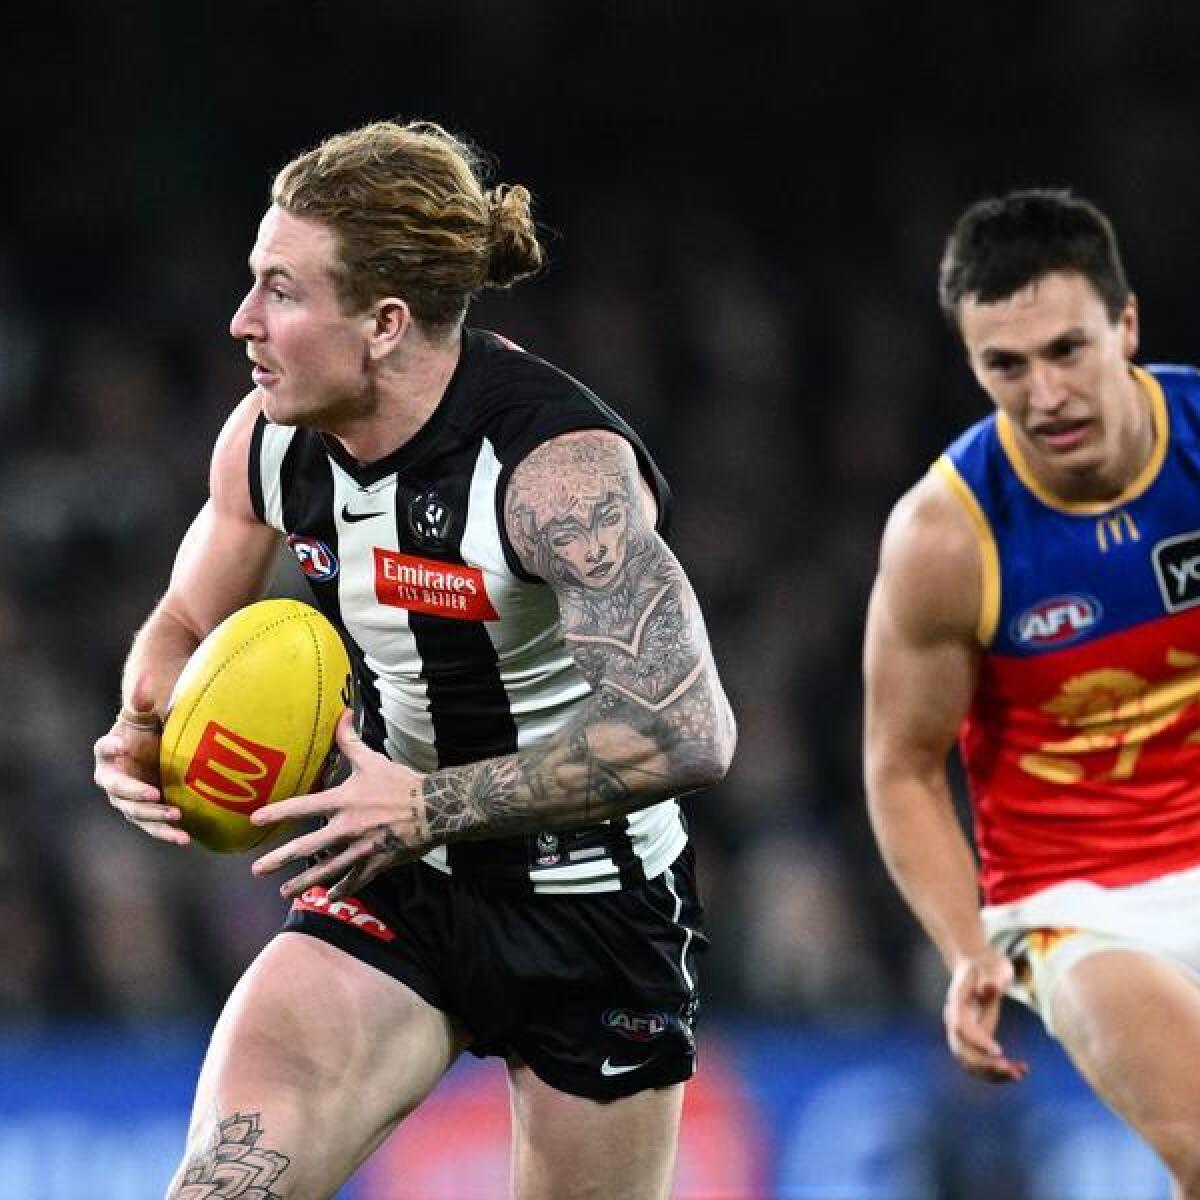 Magpies forward McCreery banned for dangerous tackle | Shepparton News